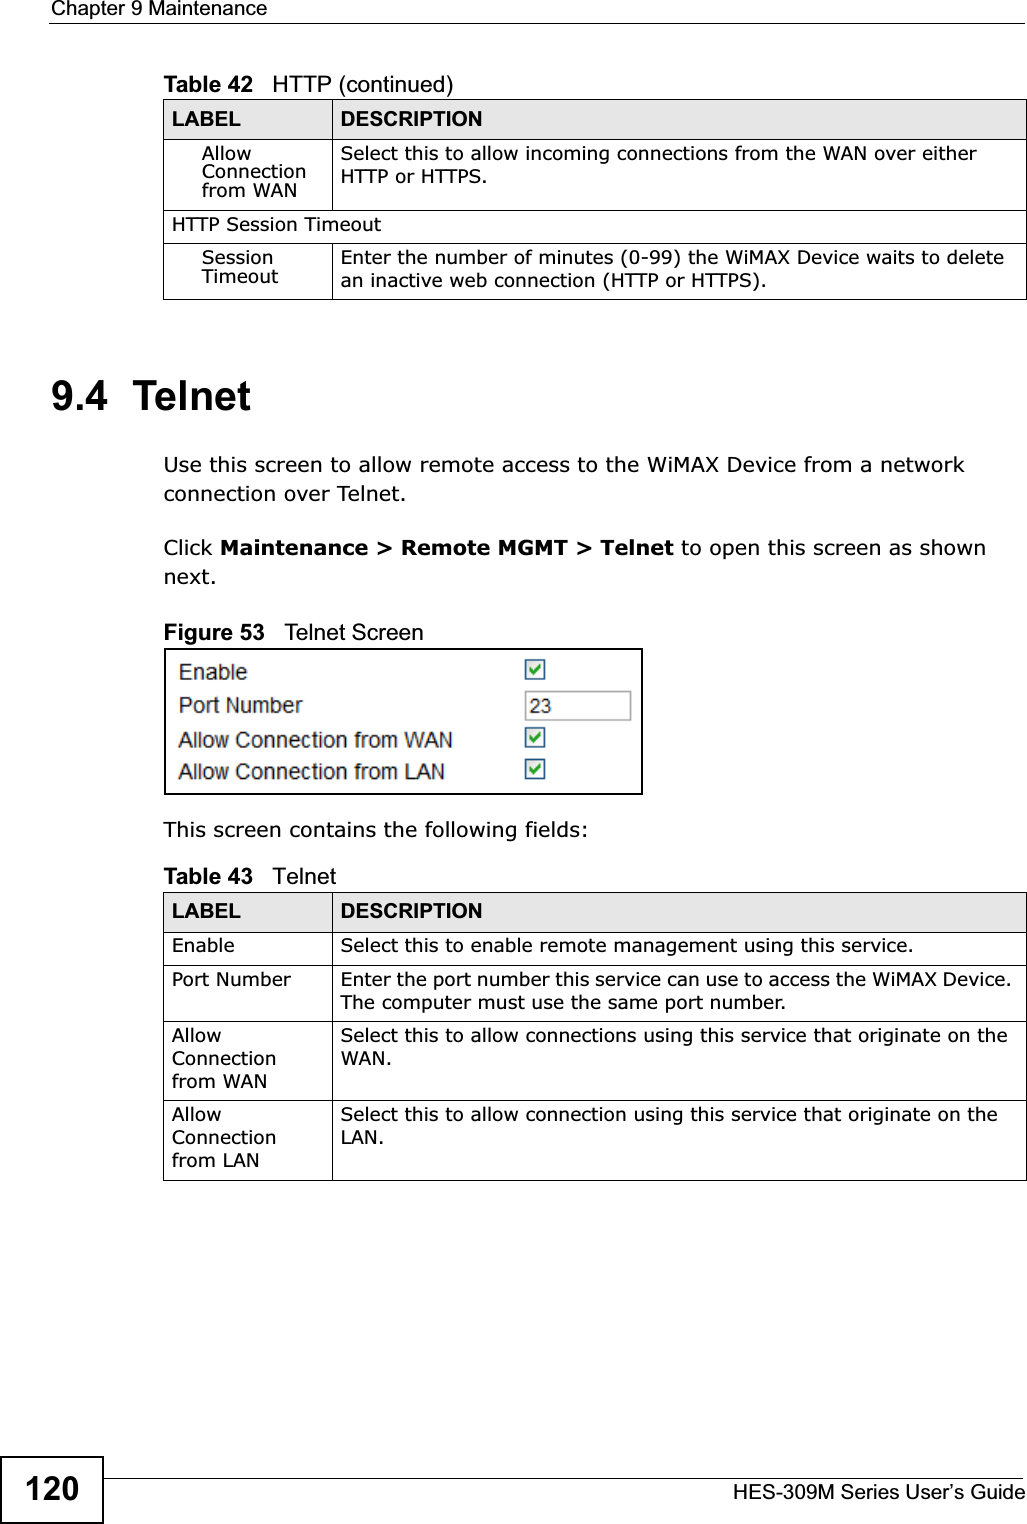 Chapter 9 MaintenanceHES-309M Series User’s Guide1209.4  TelnetUse this screen to allow remote access to the WiMAX Device from a network connection over Telnet.Click Maintenance &gt; Remote MGMT &gt; Telnet to open this screen as shown next.Figure 53   Telnet ScreenThis screen contains the following fields:AllowConnection from WANSelect this to allow incoming connections from the WAN over either HTTP or HTTPS.HTTP Session TimeoutSessionTimeout Enter the number of minutes (0-99) the WiMAX Device waits to delete an inactive web connection (HTTP or HTTPS).Table 42   HTTP (continued)LABEL DESCRIPTIONTable 43   TelnetLABEL DESCRIPTIONEnable Select this to enable remote management using this service.Port Number Enter the port number this service can use to access the WiMAX Device. The computer must use the same port number.AllowConnection from WANSelect this to allow connections using this service that originate on the WAN.AllowConnection from LANSelect this to allow connection using this service that originate on the LAN.